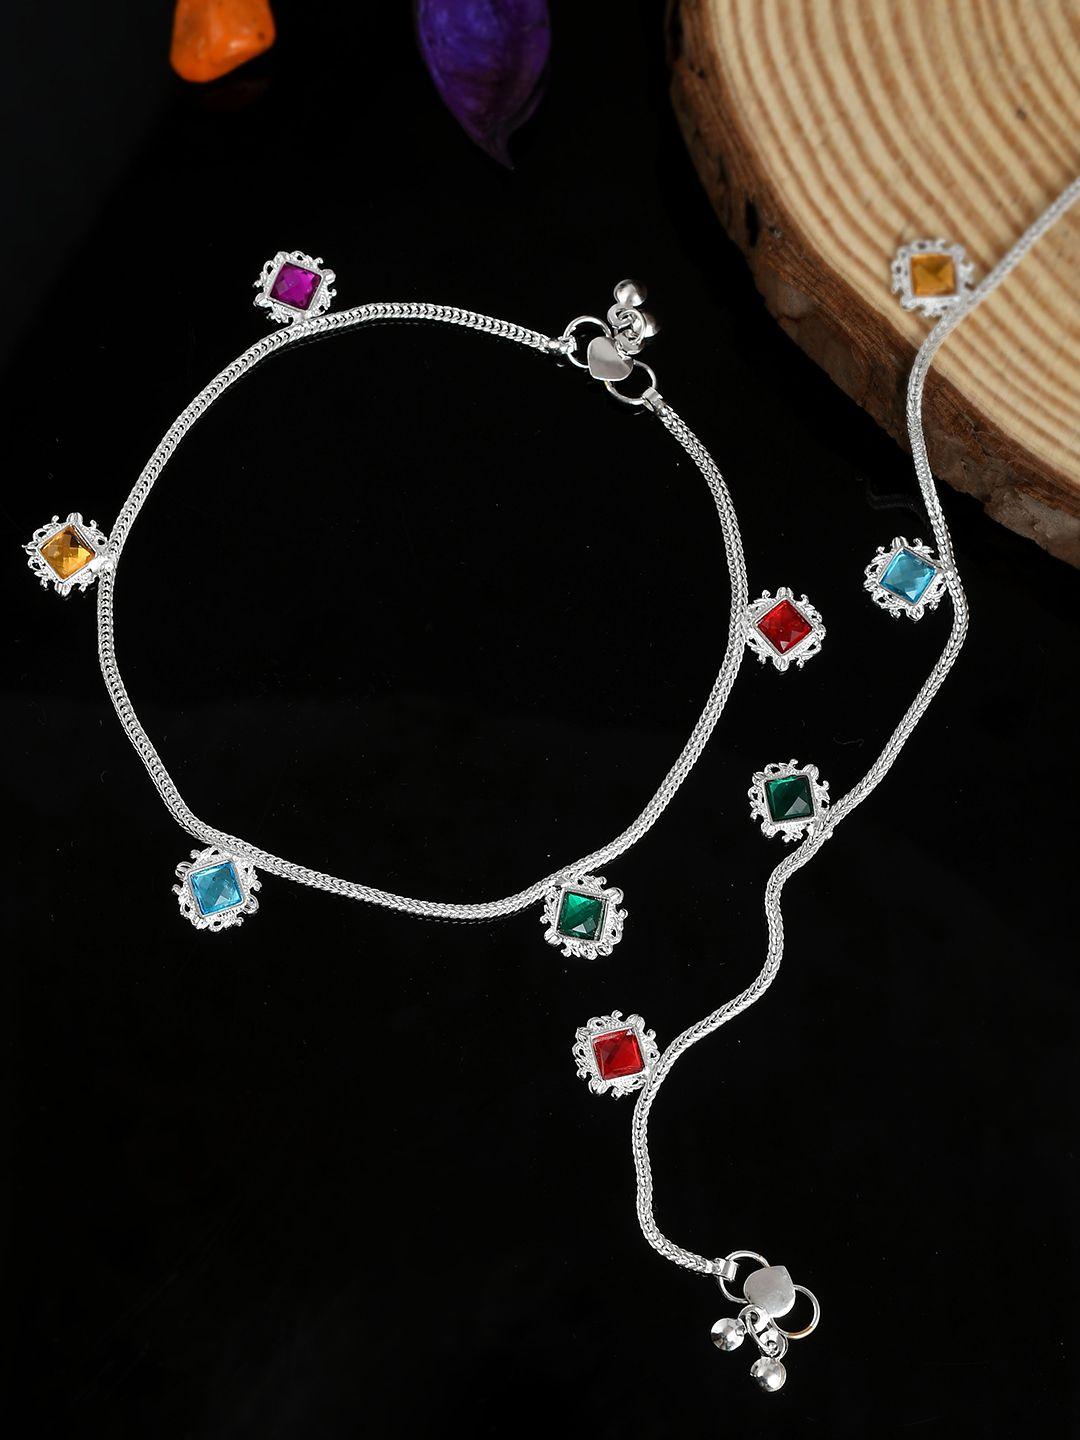 silvermerc designs set of 2 silver-plated red & yellow stone-studded & enamelled beaded anklets